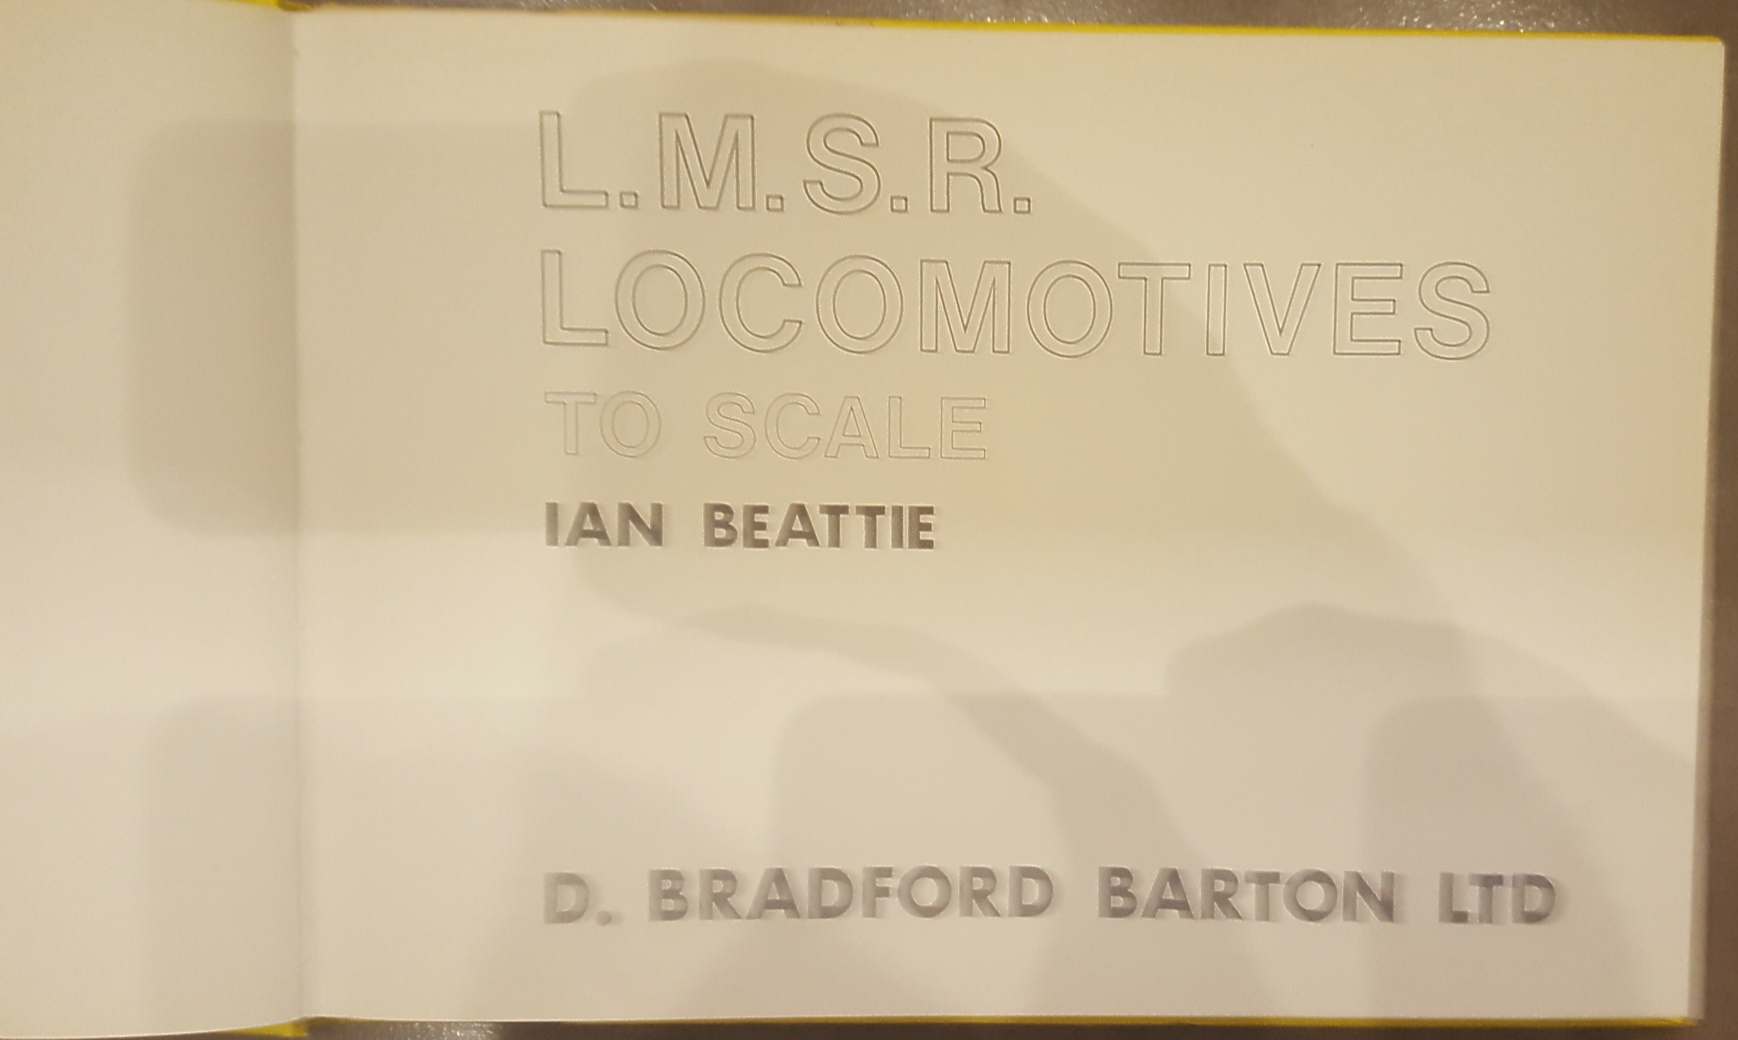 Book L.M.S.R Locomotives To Scale ***reserve reduced*** - Image 2 of 5